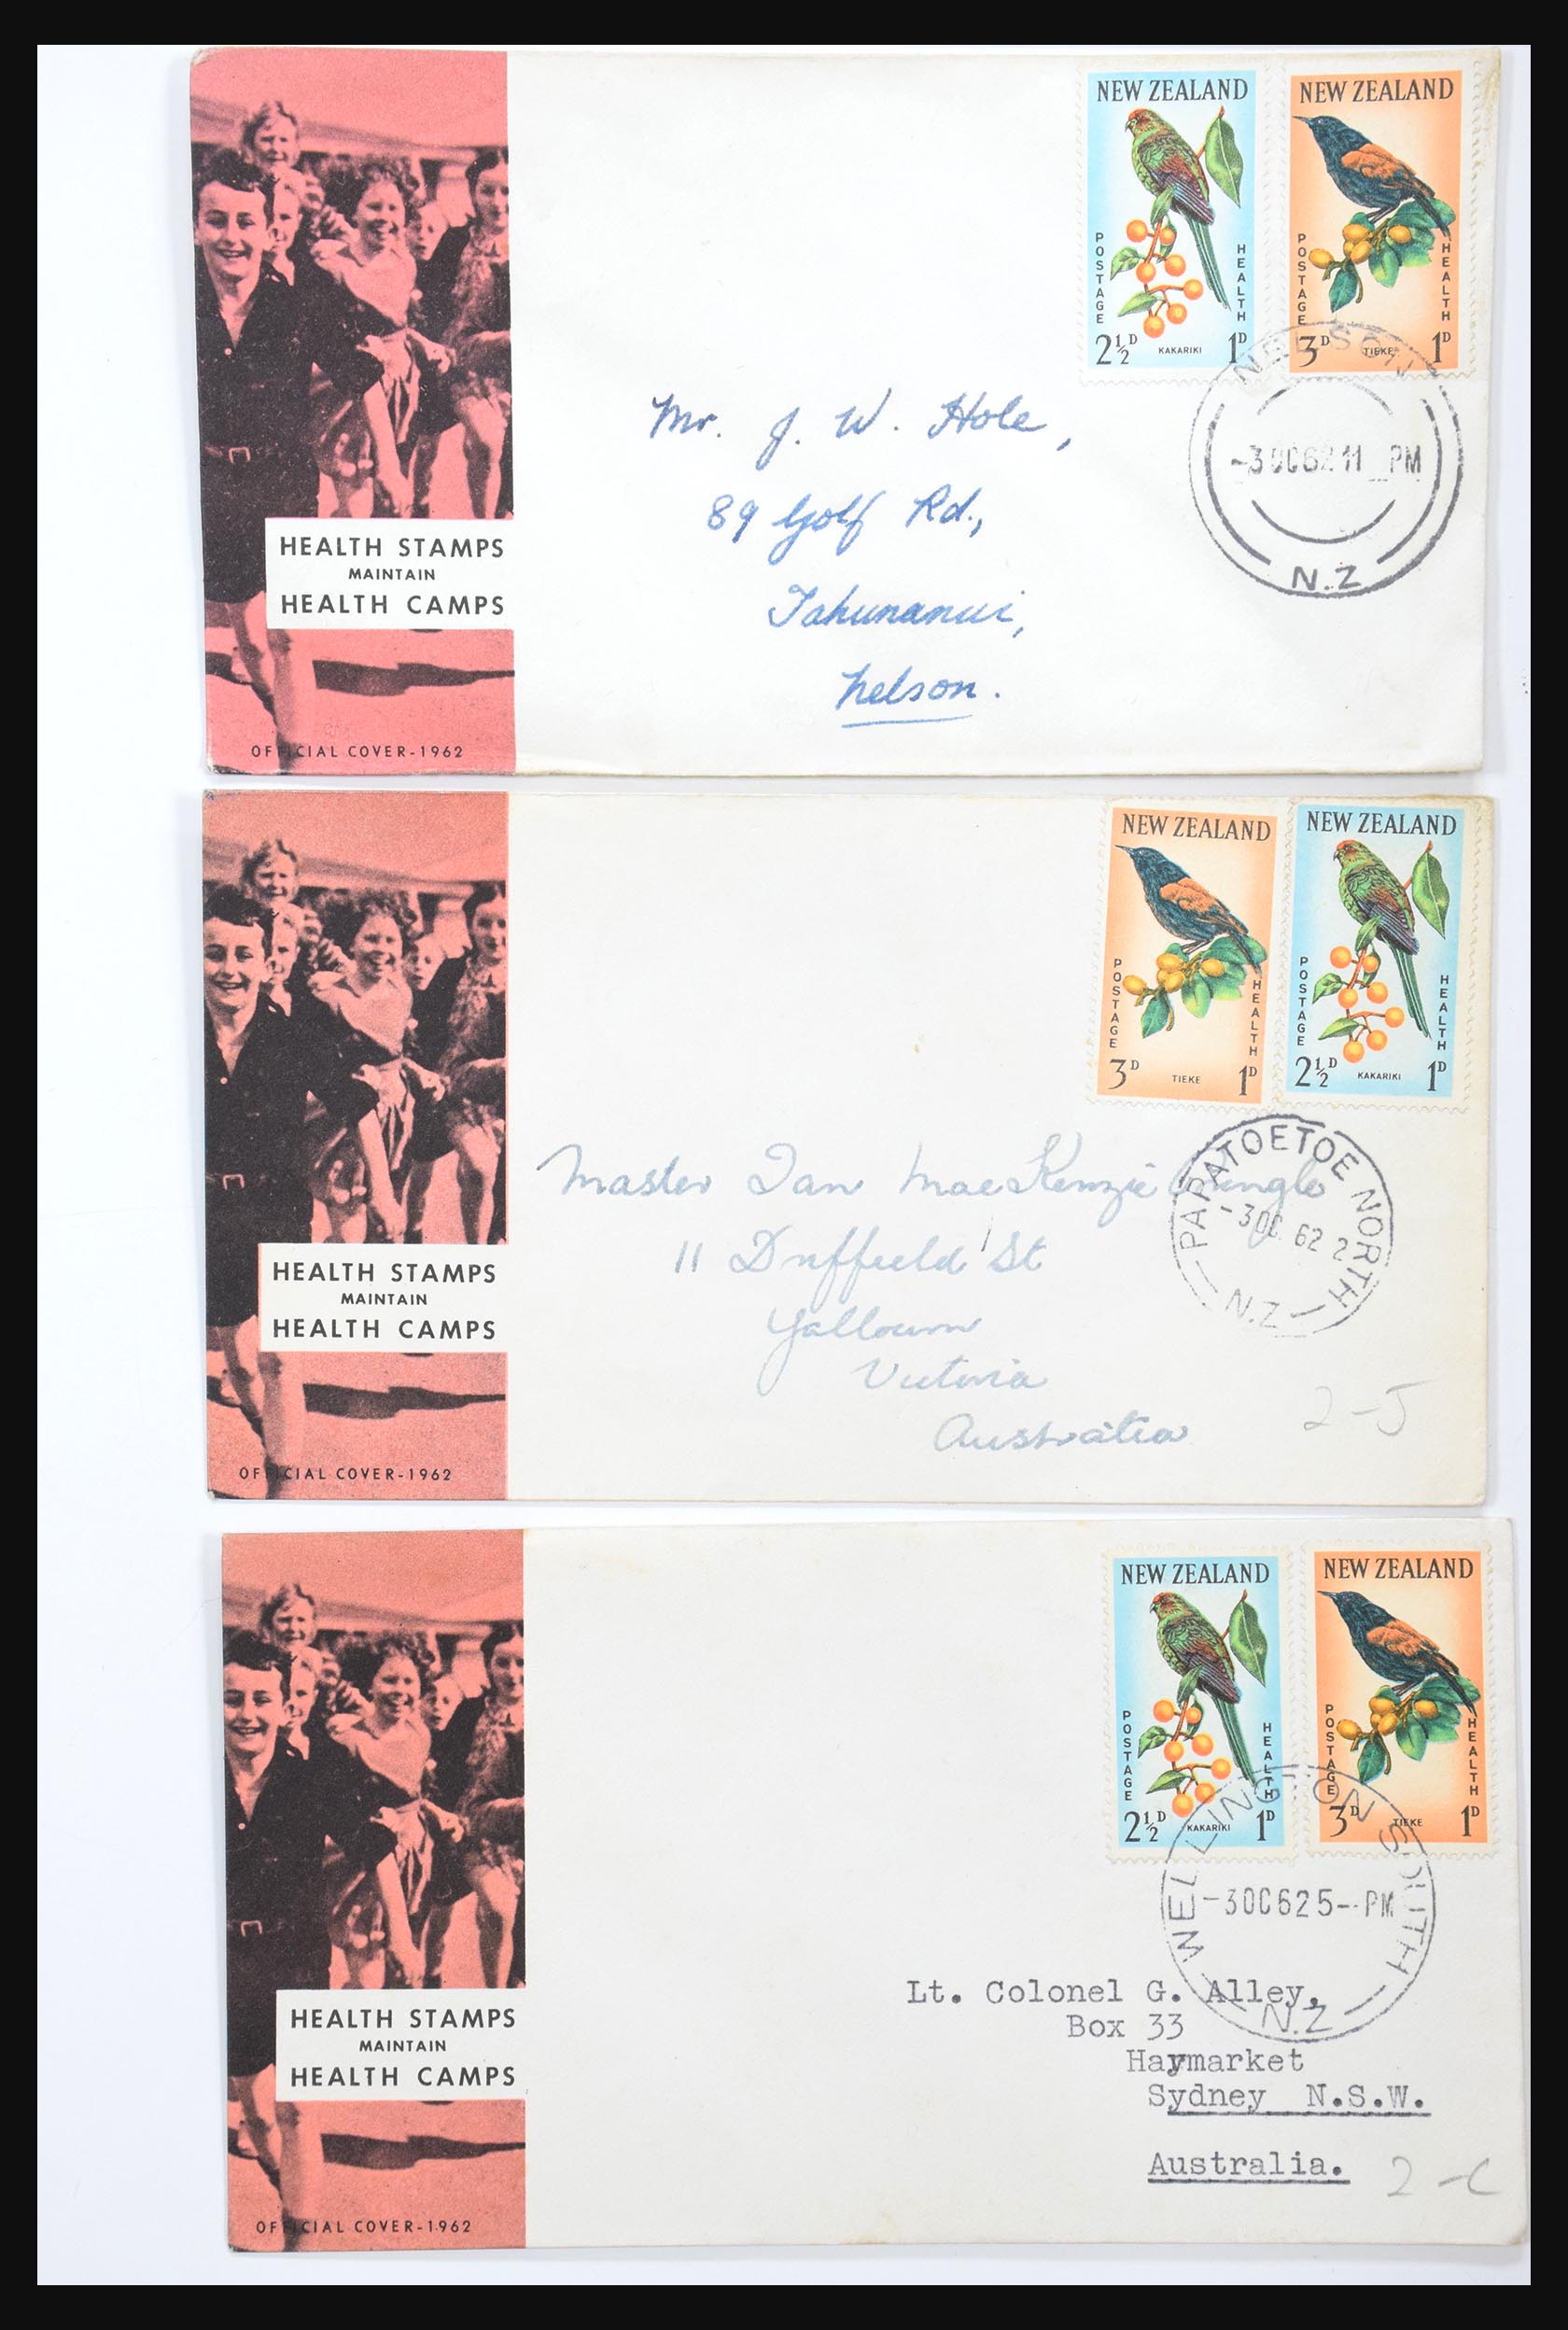 30821 036 - 30821 New Zealand FDC's 1960-1971.